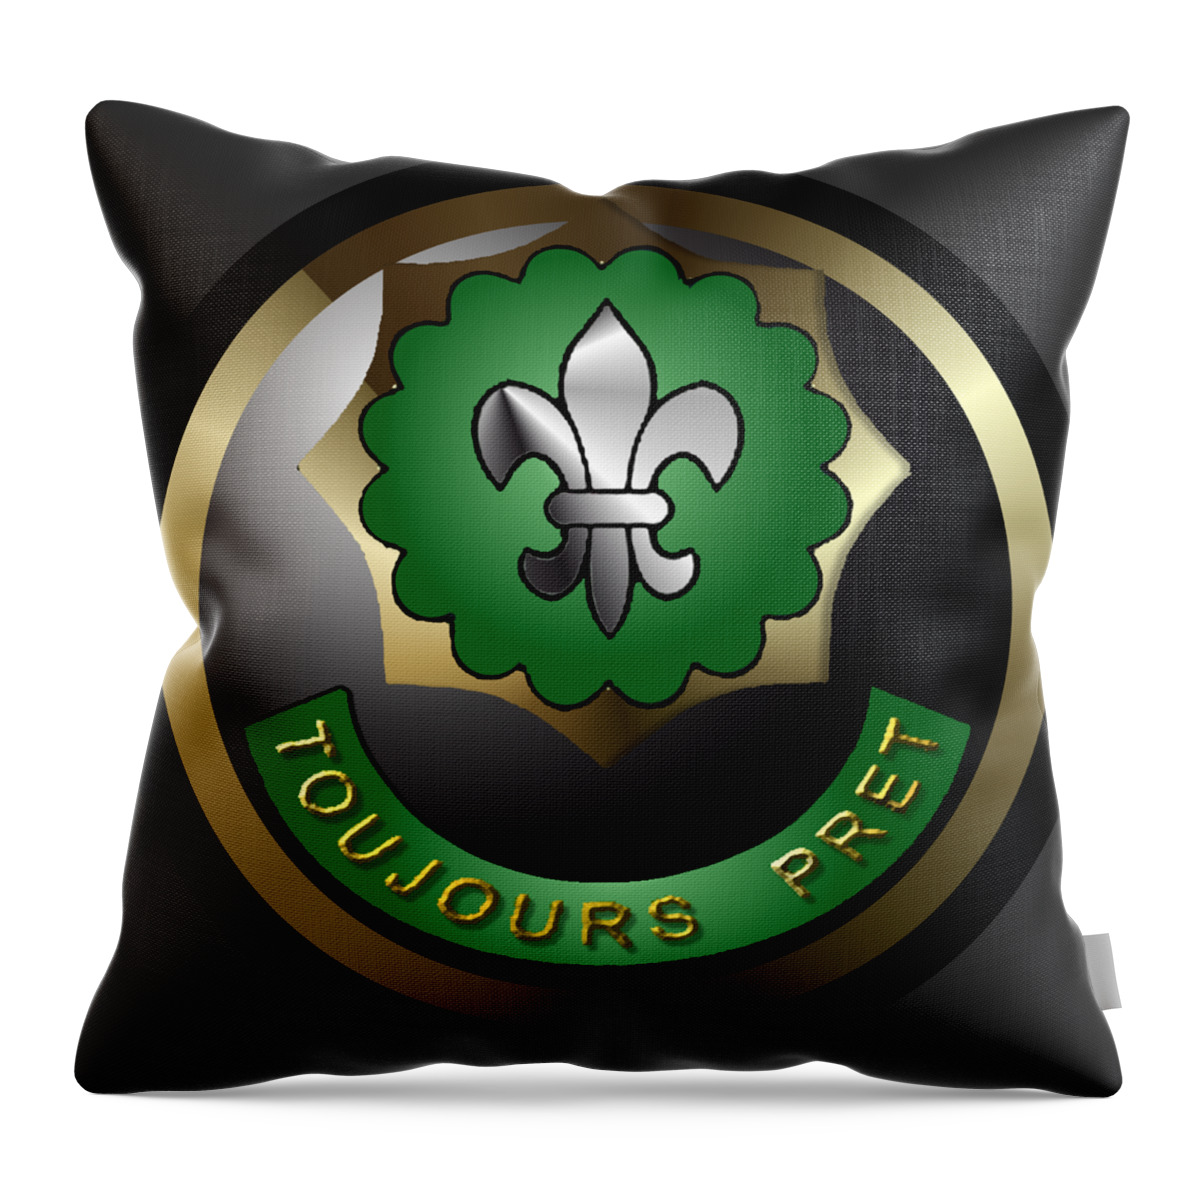 Toujours Throw Pillow featuring the digital art TouJours Pret by Bill Richards